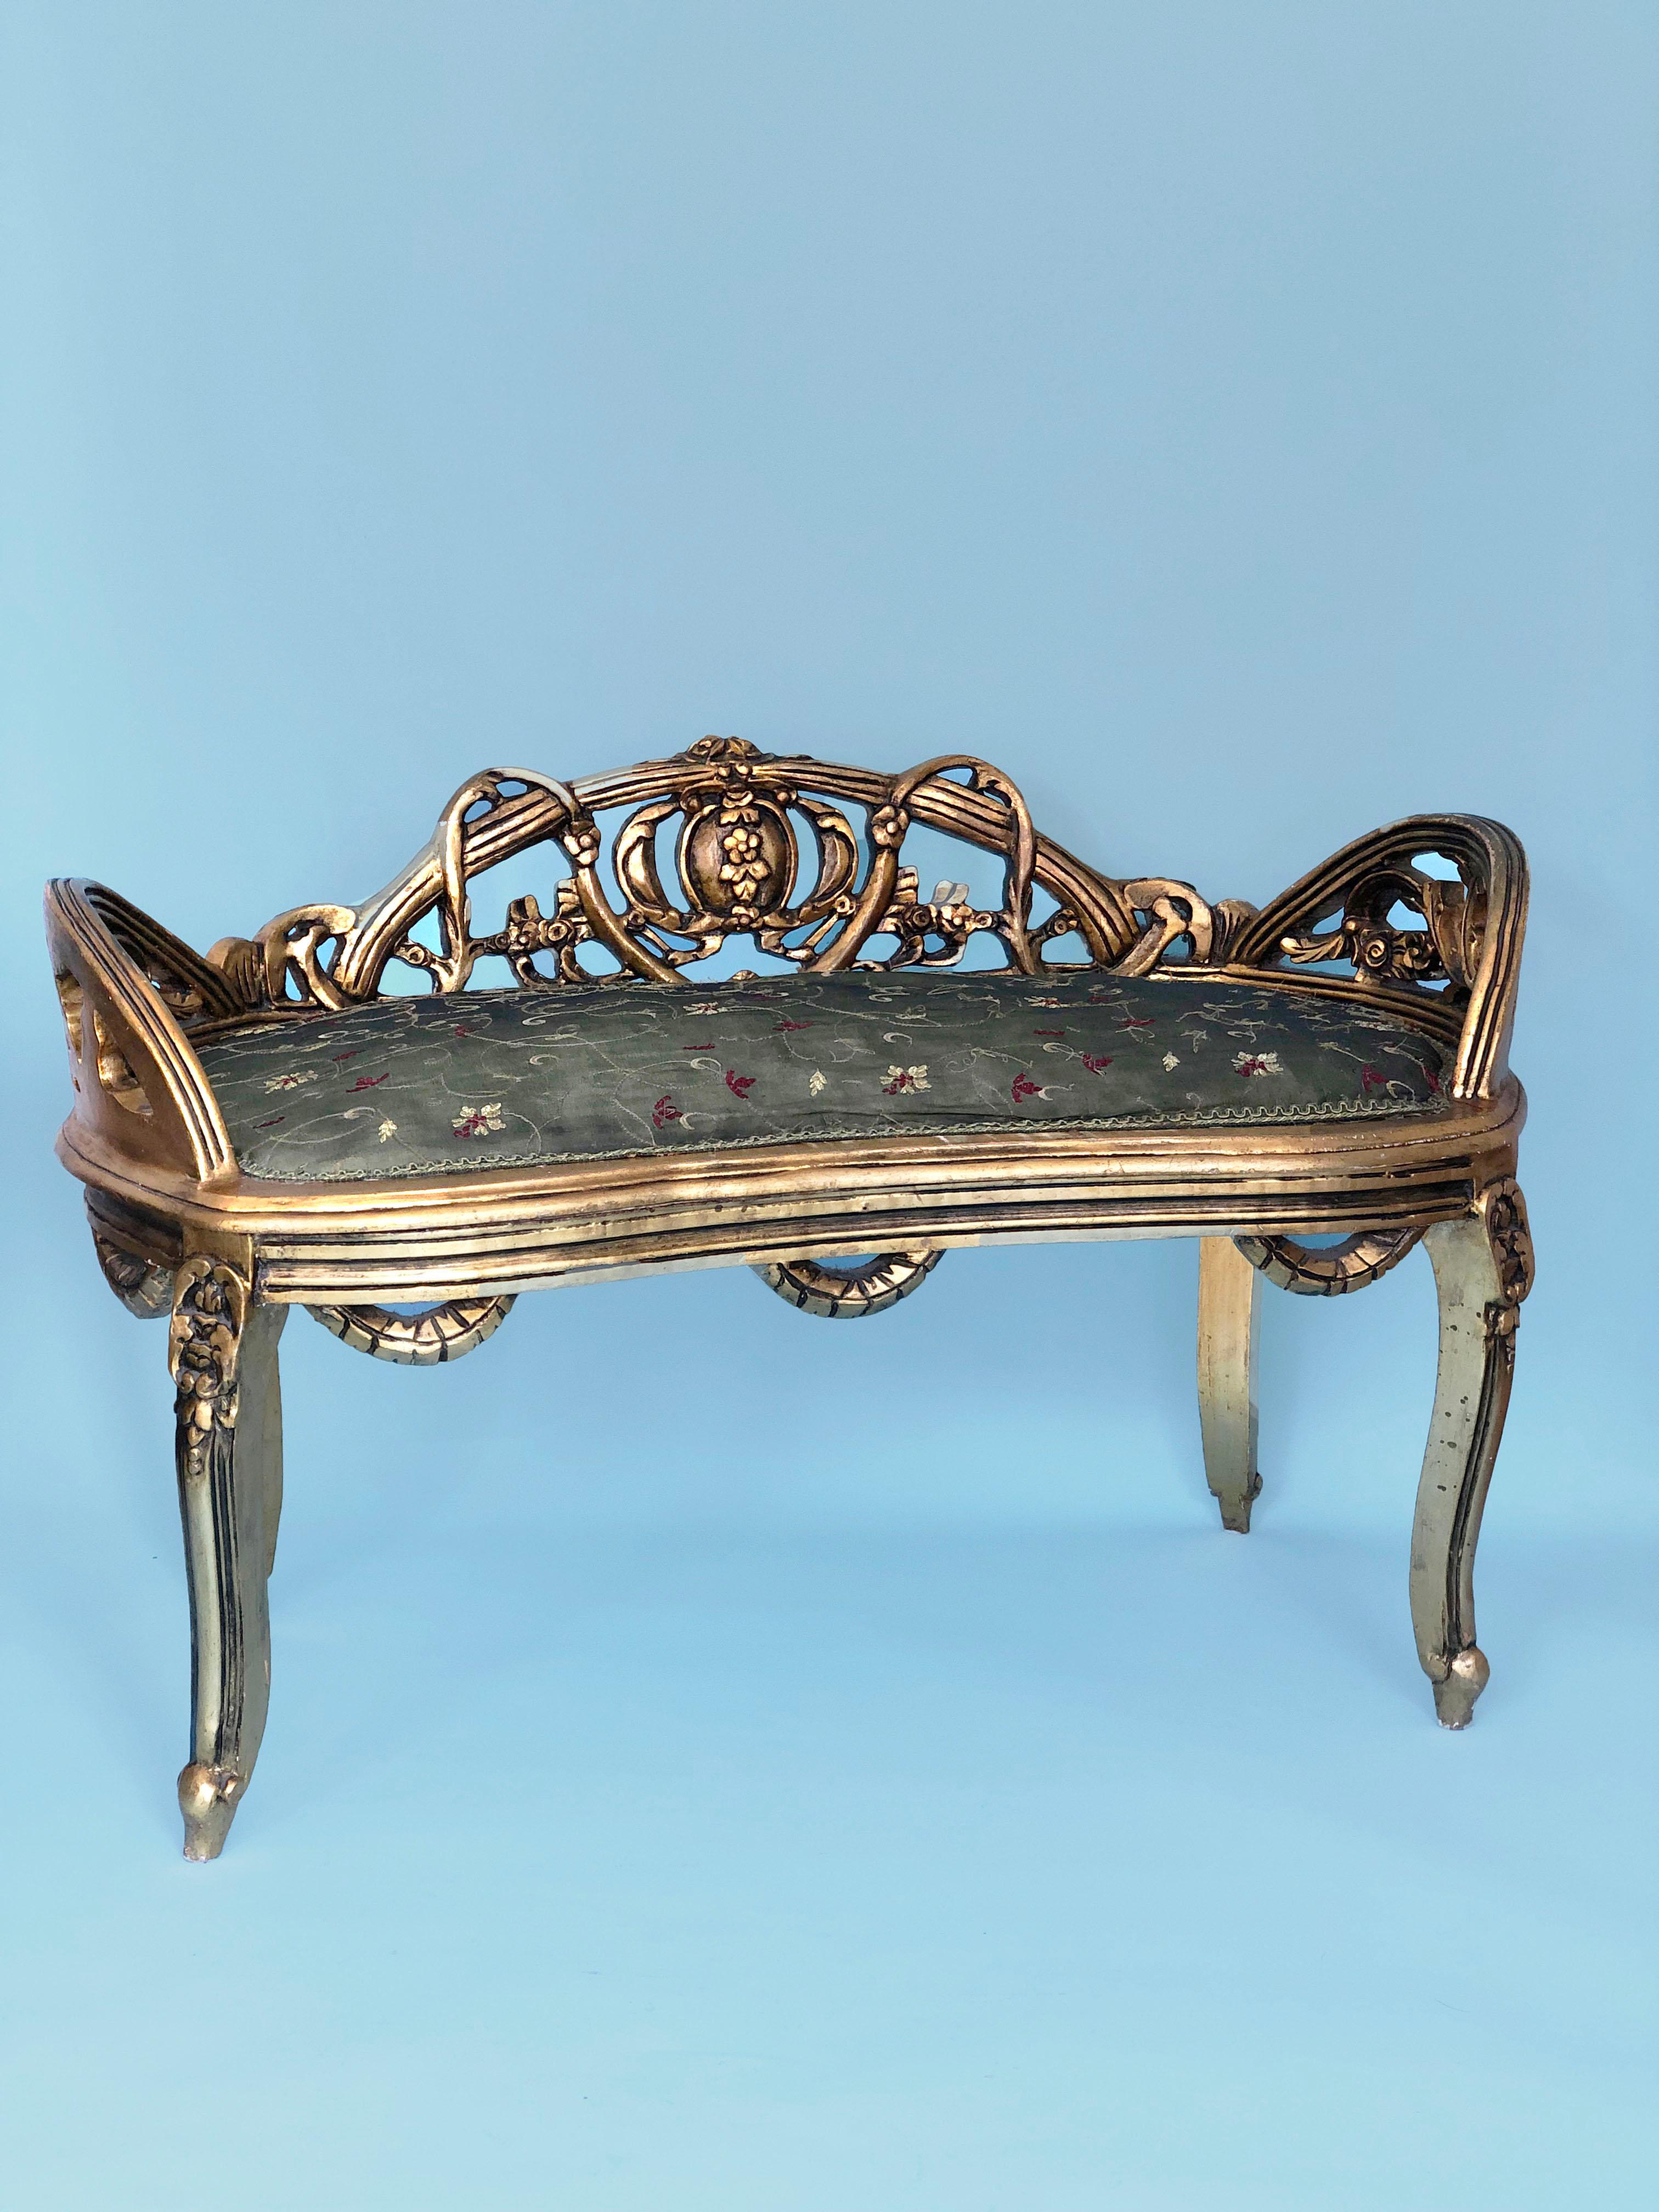 A very detailed gilded wooden bench in Louis XV style. This bench has the appearance of the grandeur of yesteryear.
The green fabric is in good condition. Embroidered flowers in yellow and red are placed on this. Very soft to sit on.

Object: